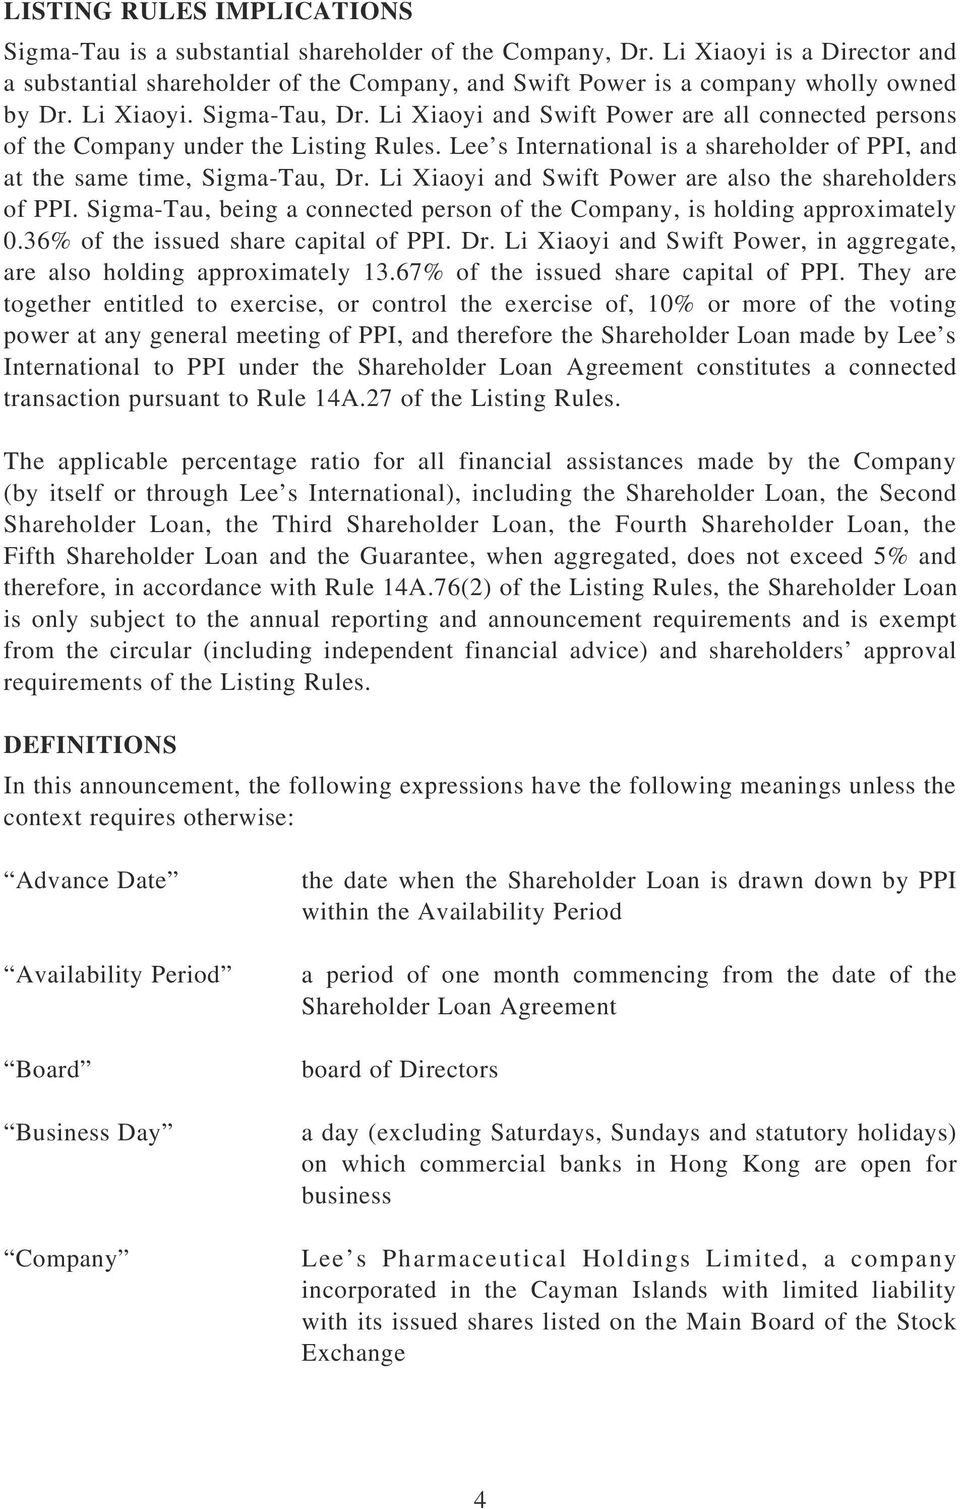 Li Xiaoyi and Swift Power are all connected persons of the Company under the Listing Rules. Lee s International is a shareholder of PPI, and at the same time, Sigma-Tau, Dr.